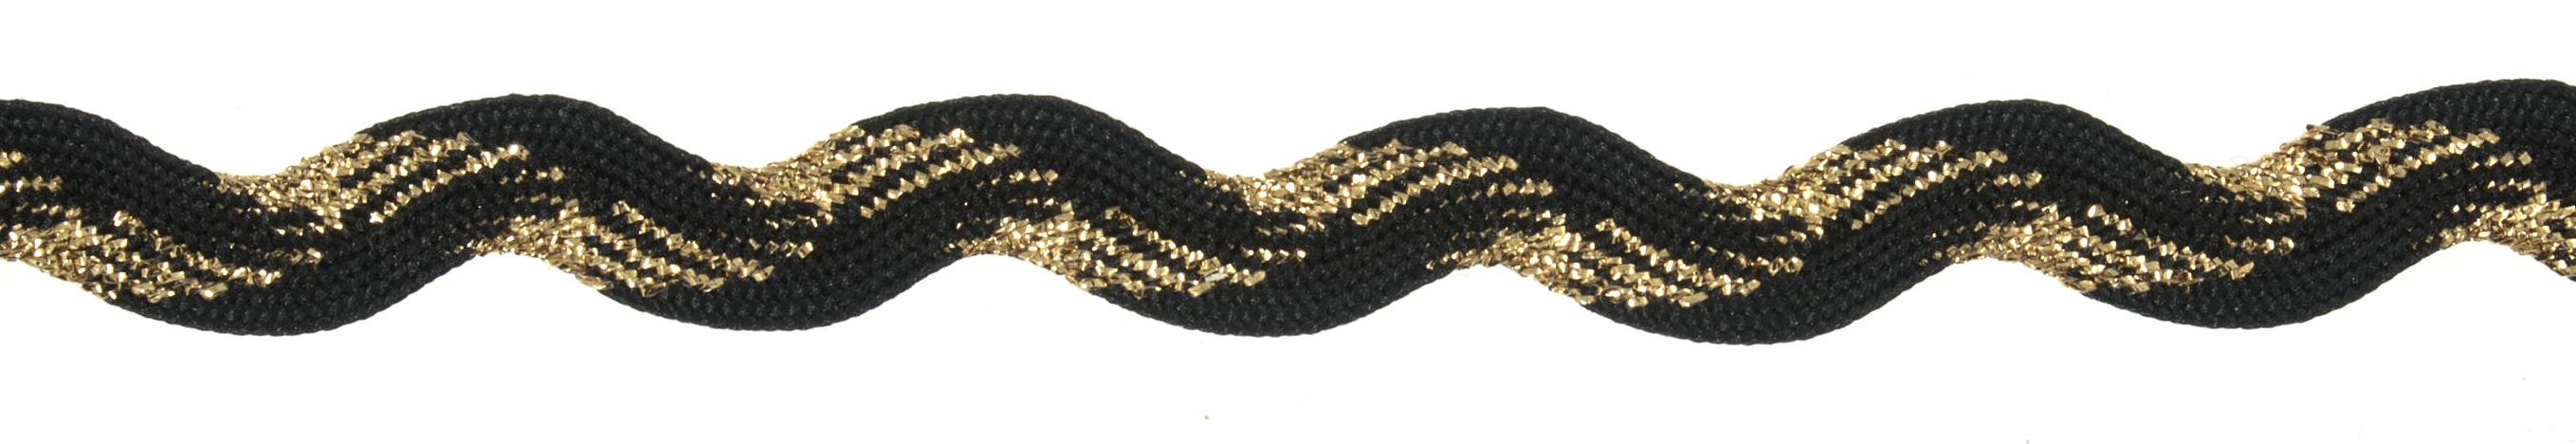 Picture of Trim: Ric Rac: Metallic: 25m x 10mm: Black and Gold